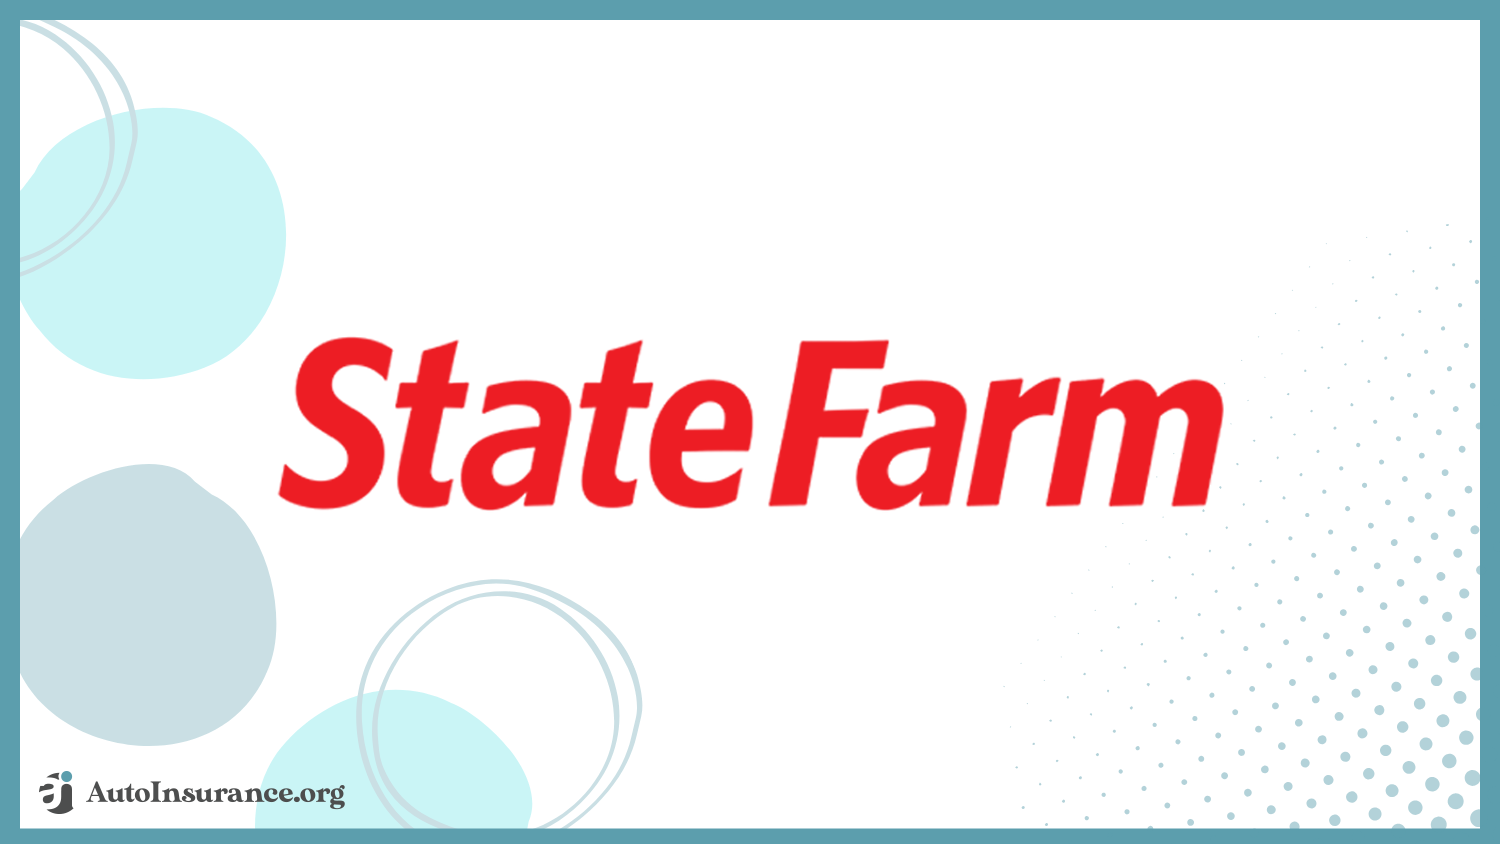 State Farm: Best Auto Insurance for Wheelchair-Accessible Vehicles